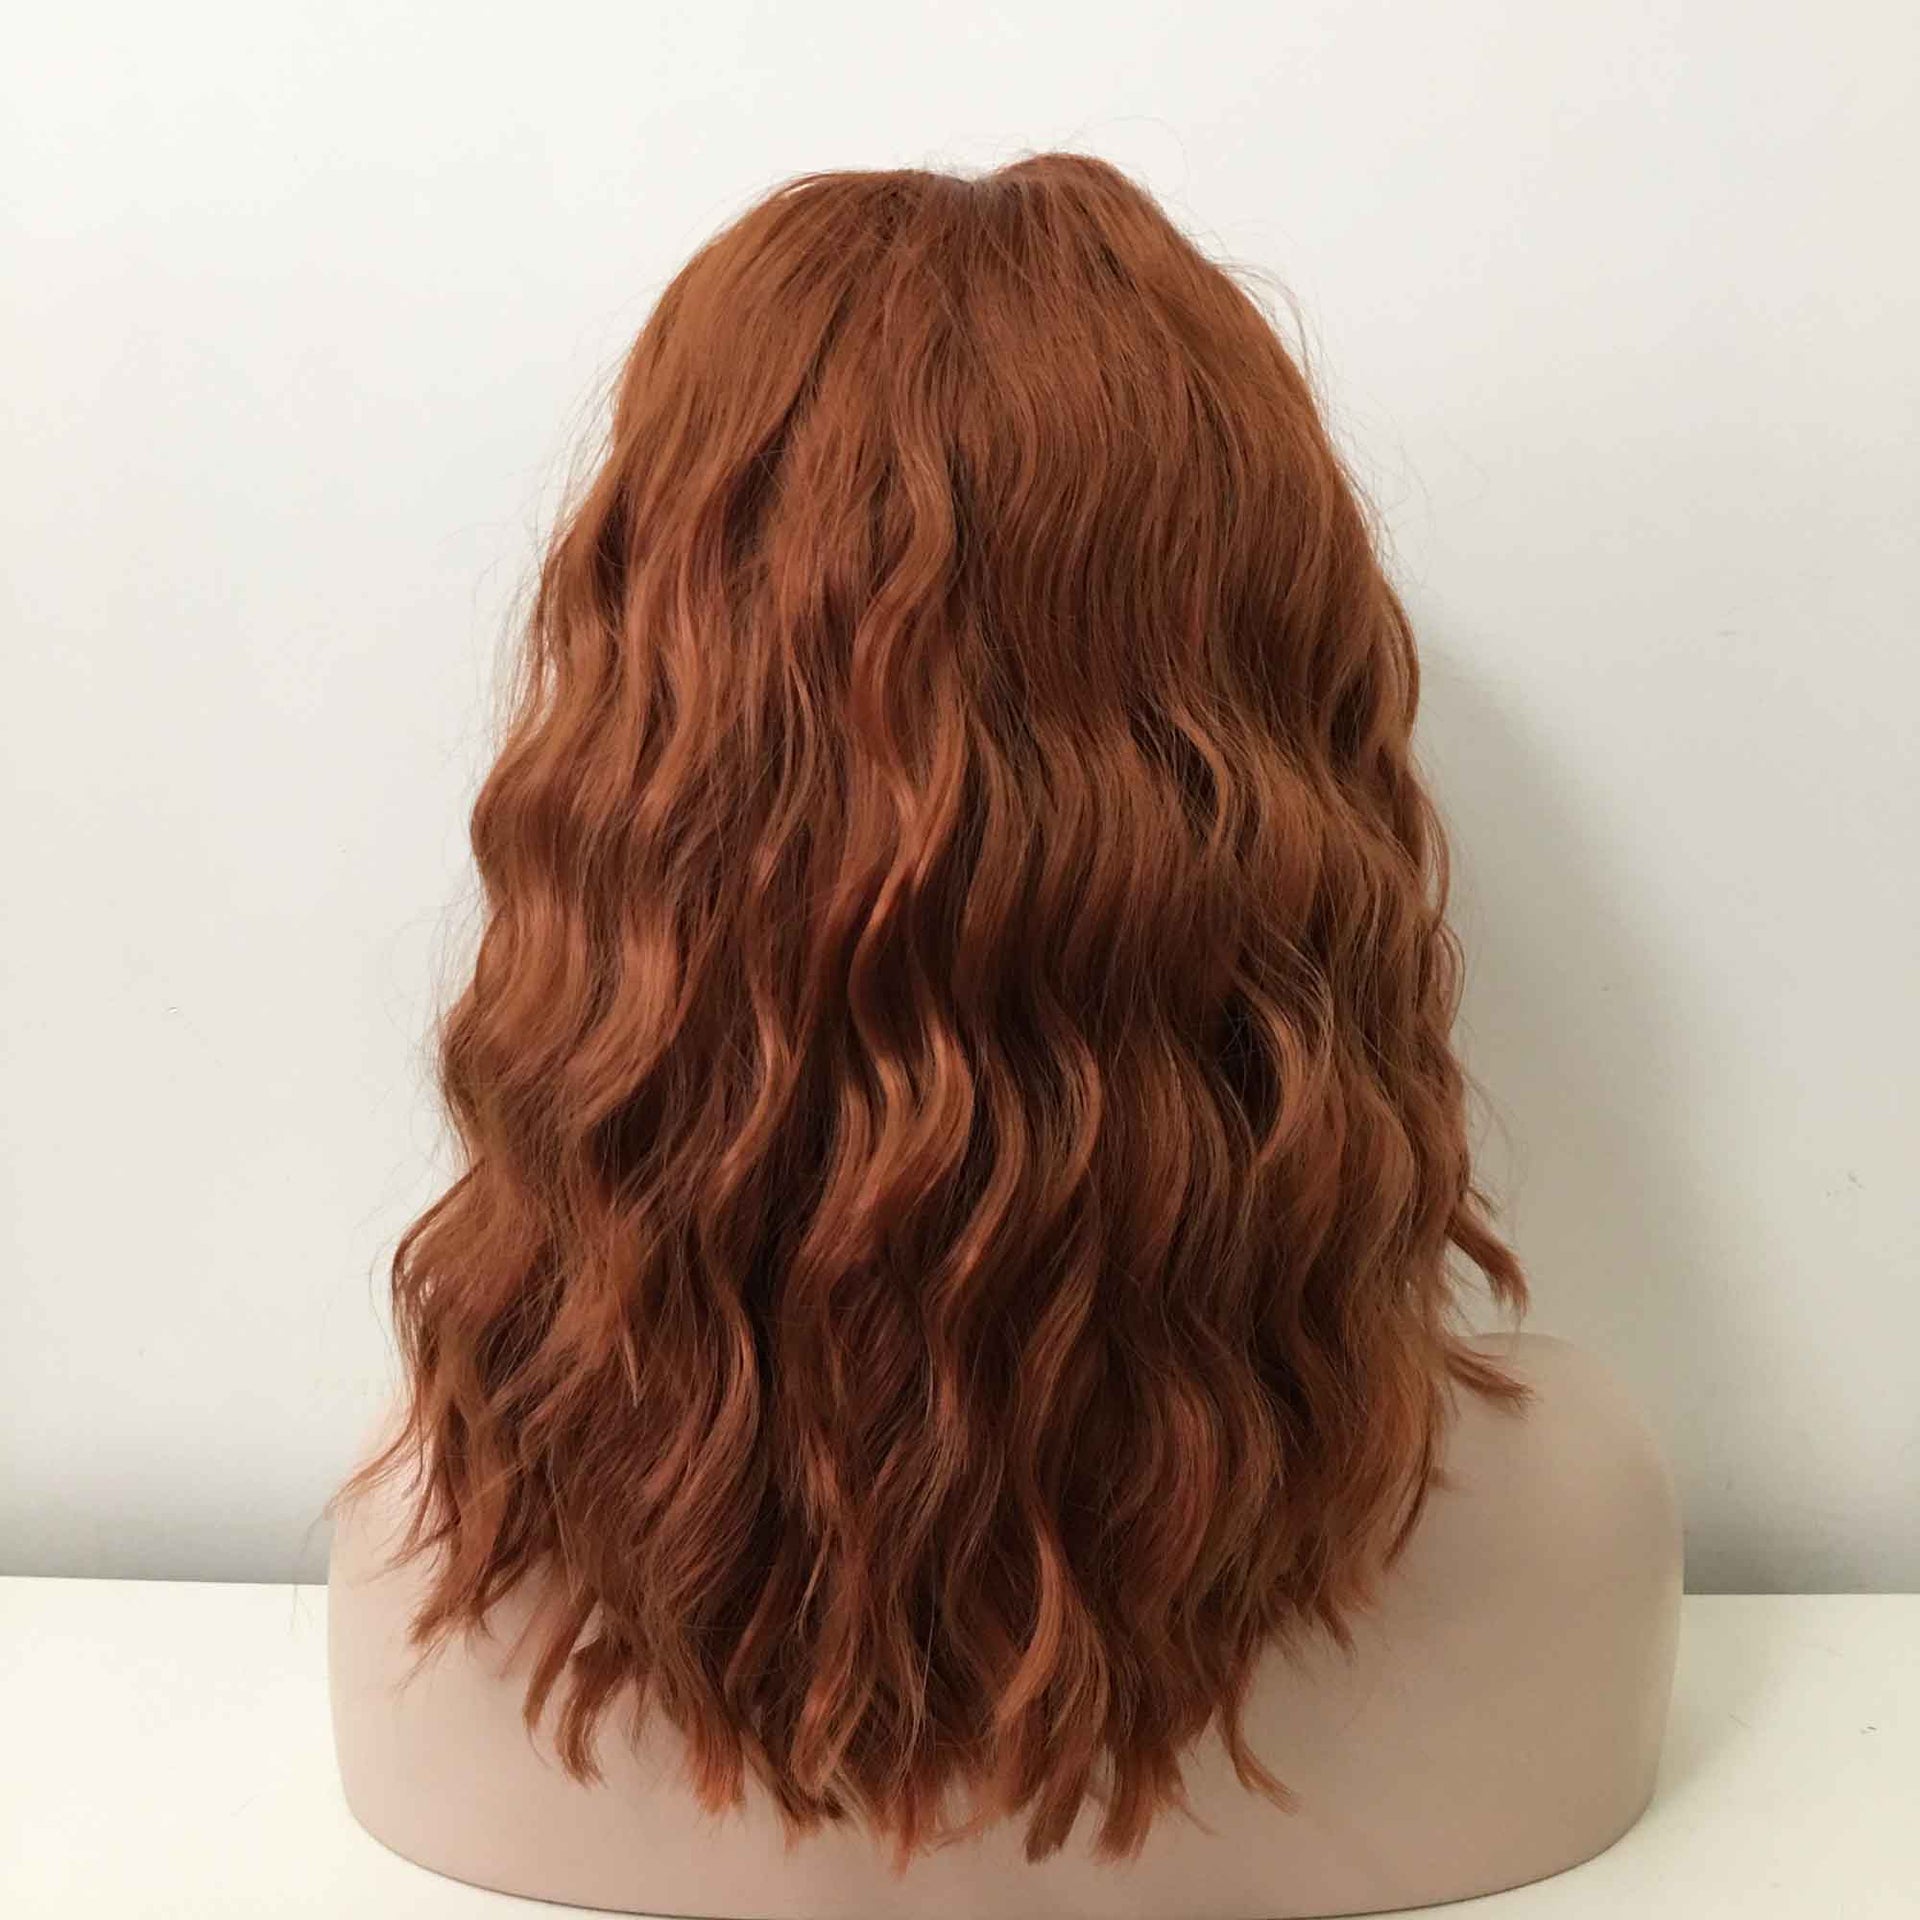 nevermindyrhead Women Auburn Ginger Red Lace Front Medium Length Curly Free Part Wig